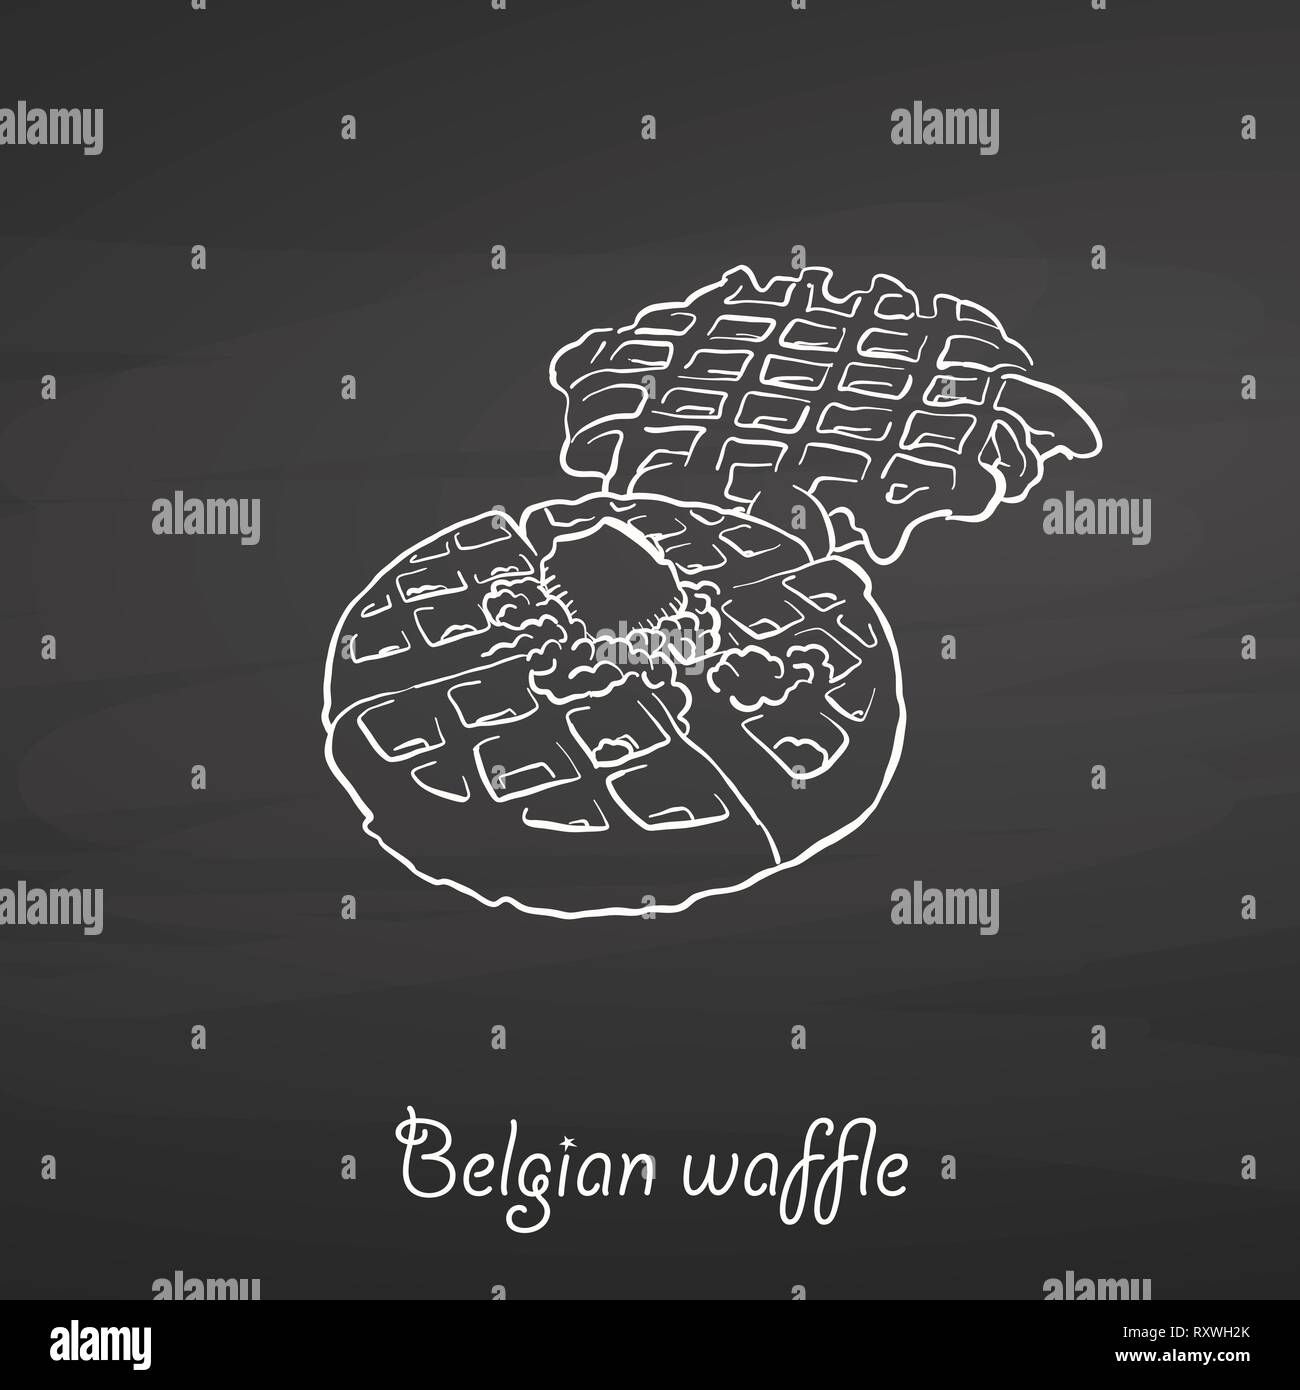 Belgian Waffle Food Sketch On Chalkboard Vector Drawing Of Waffle Usually Known In Belgium Food Illustration Series Stock Vector Image Art Alamy